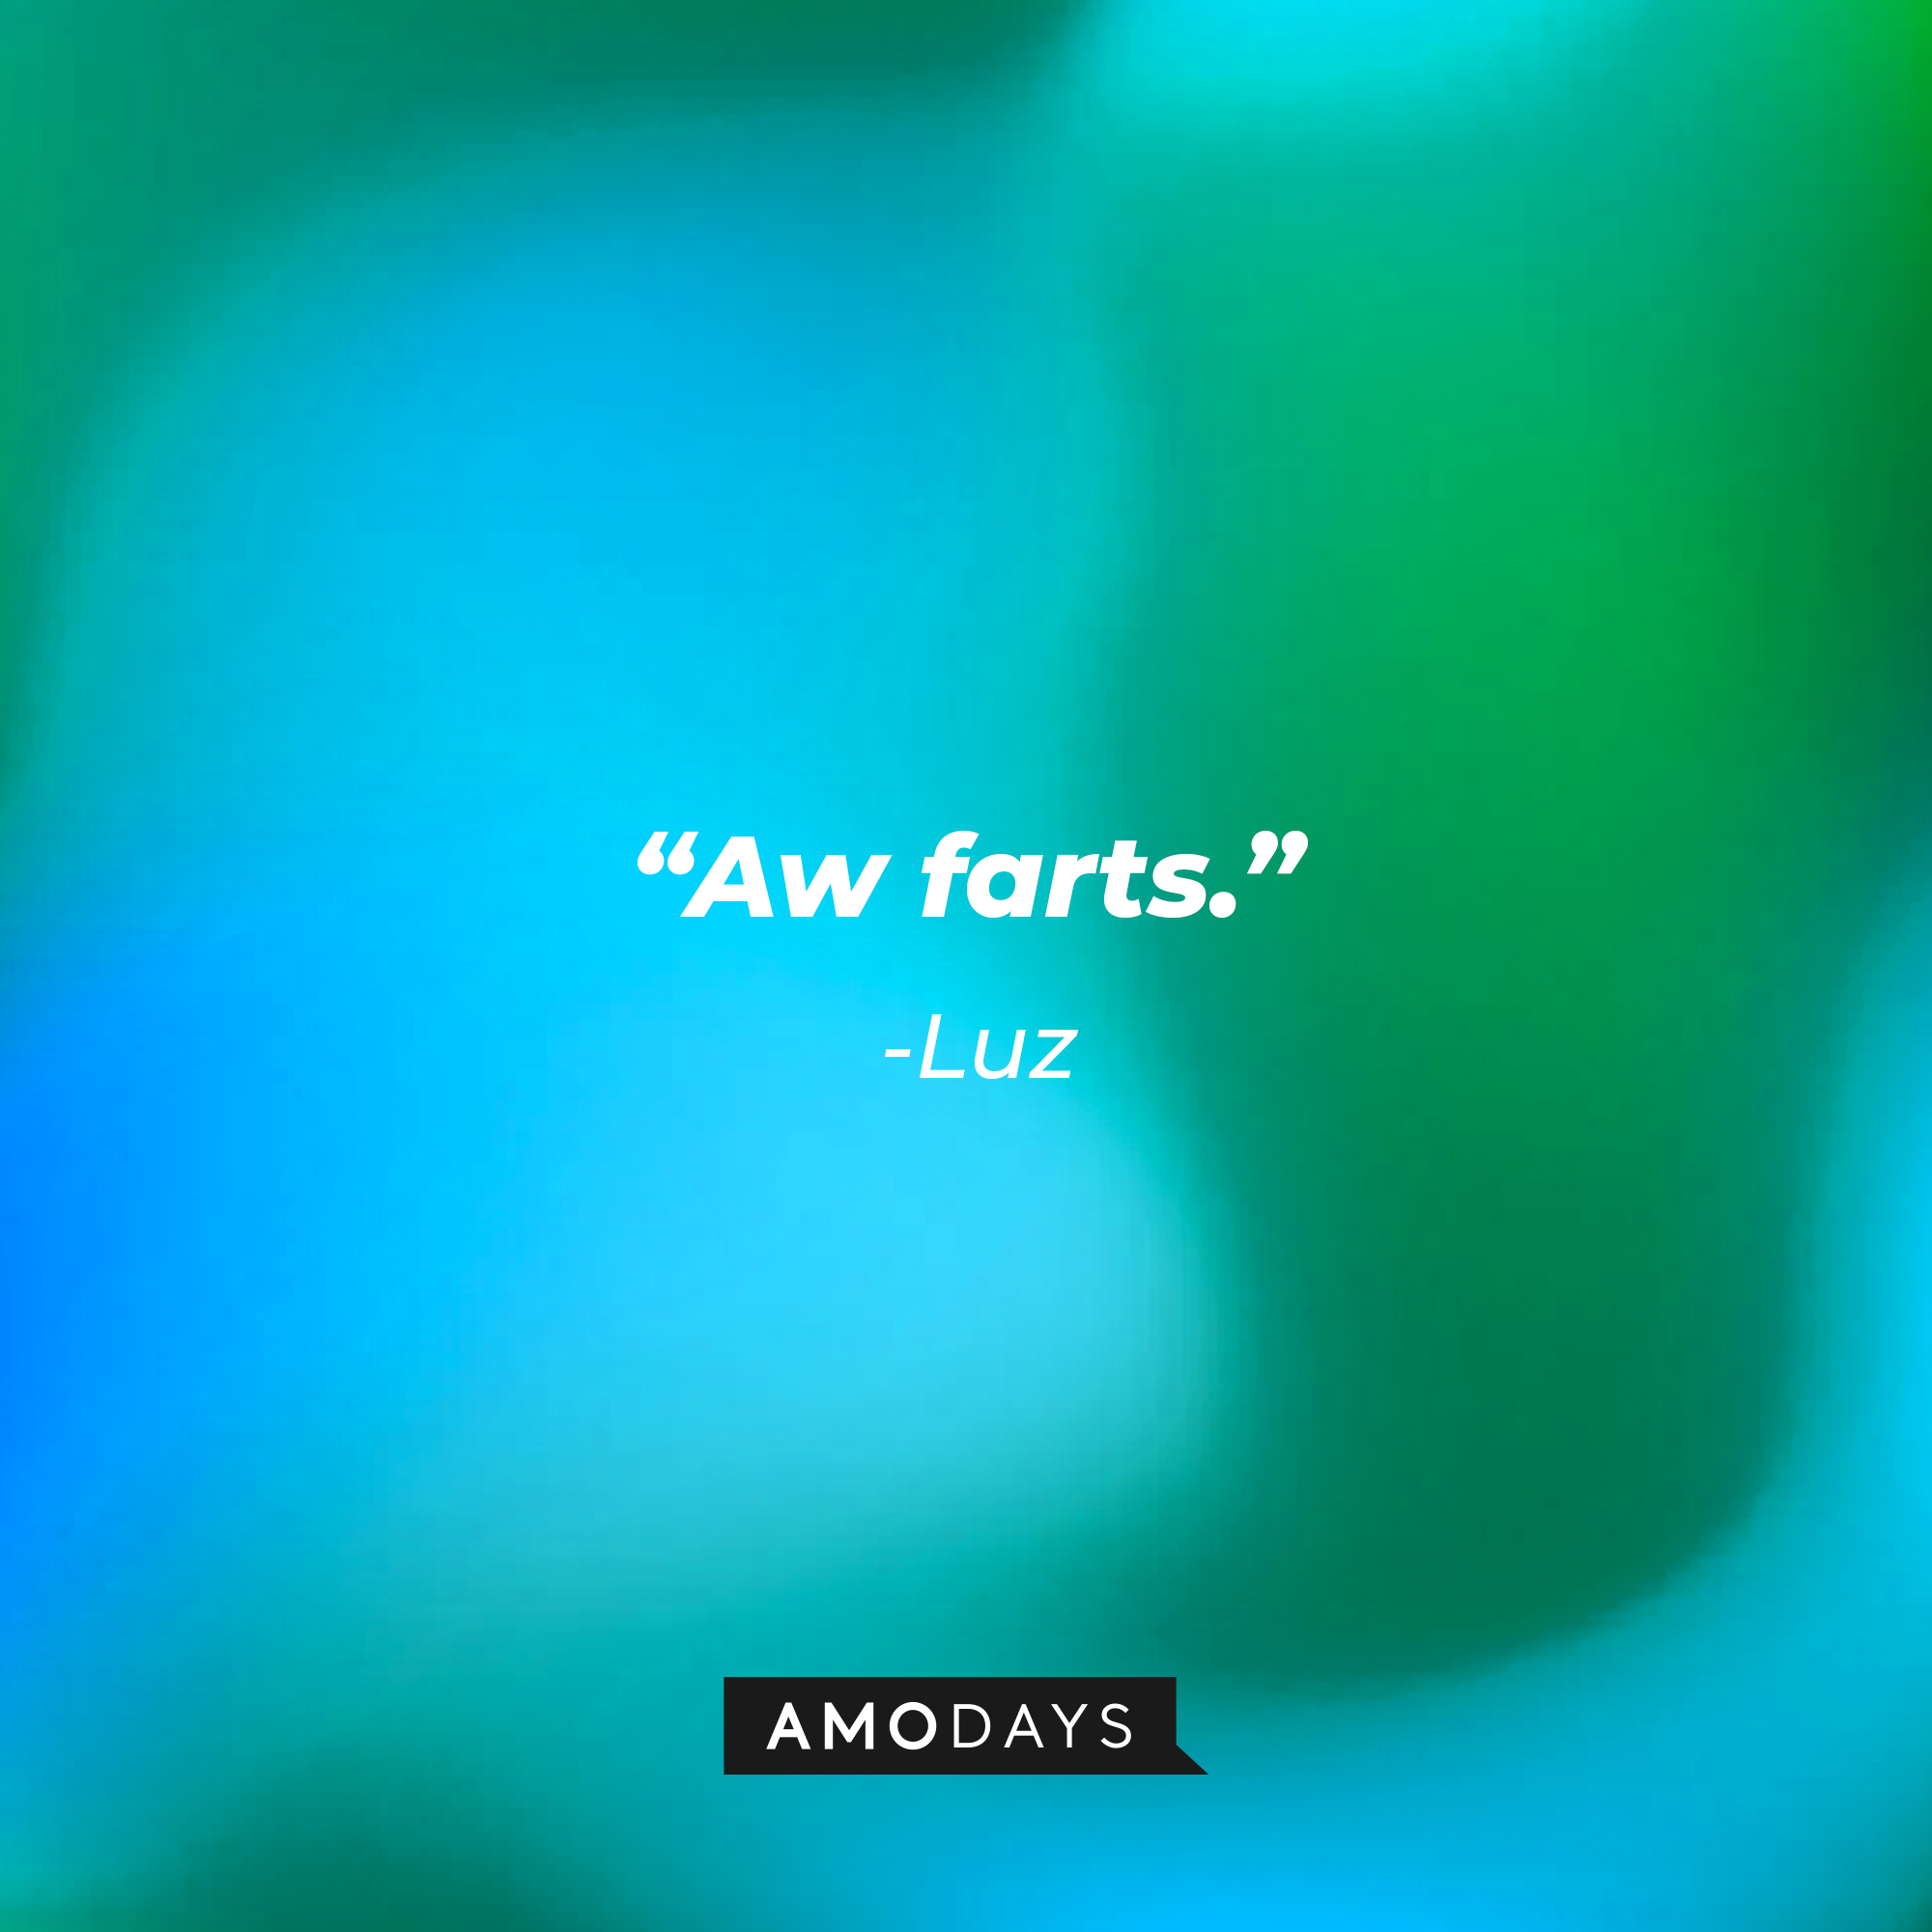 A photo with Luz's quote, "Aw farts." | Source: Amodays